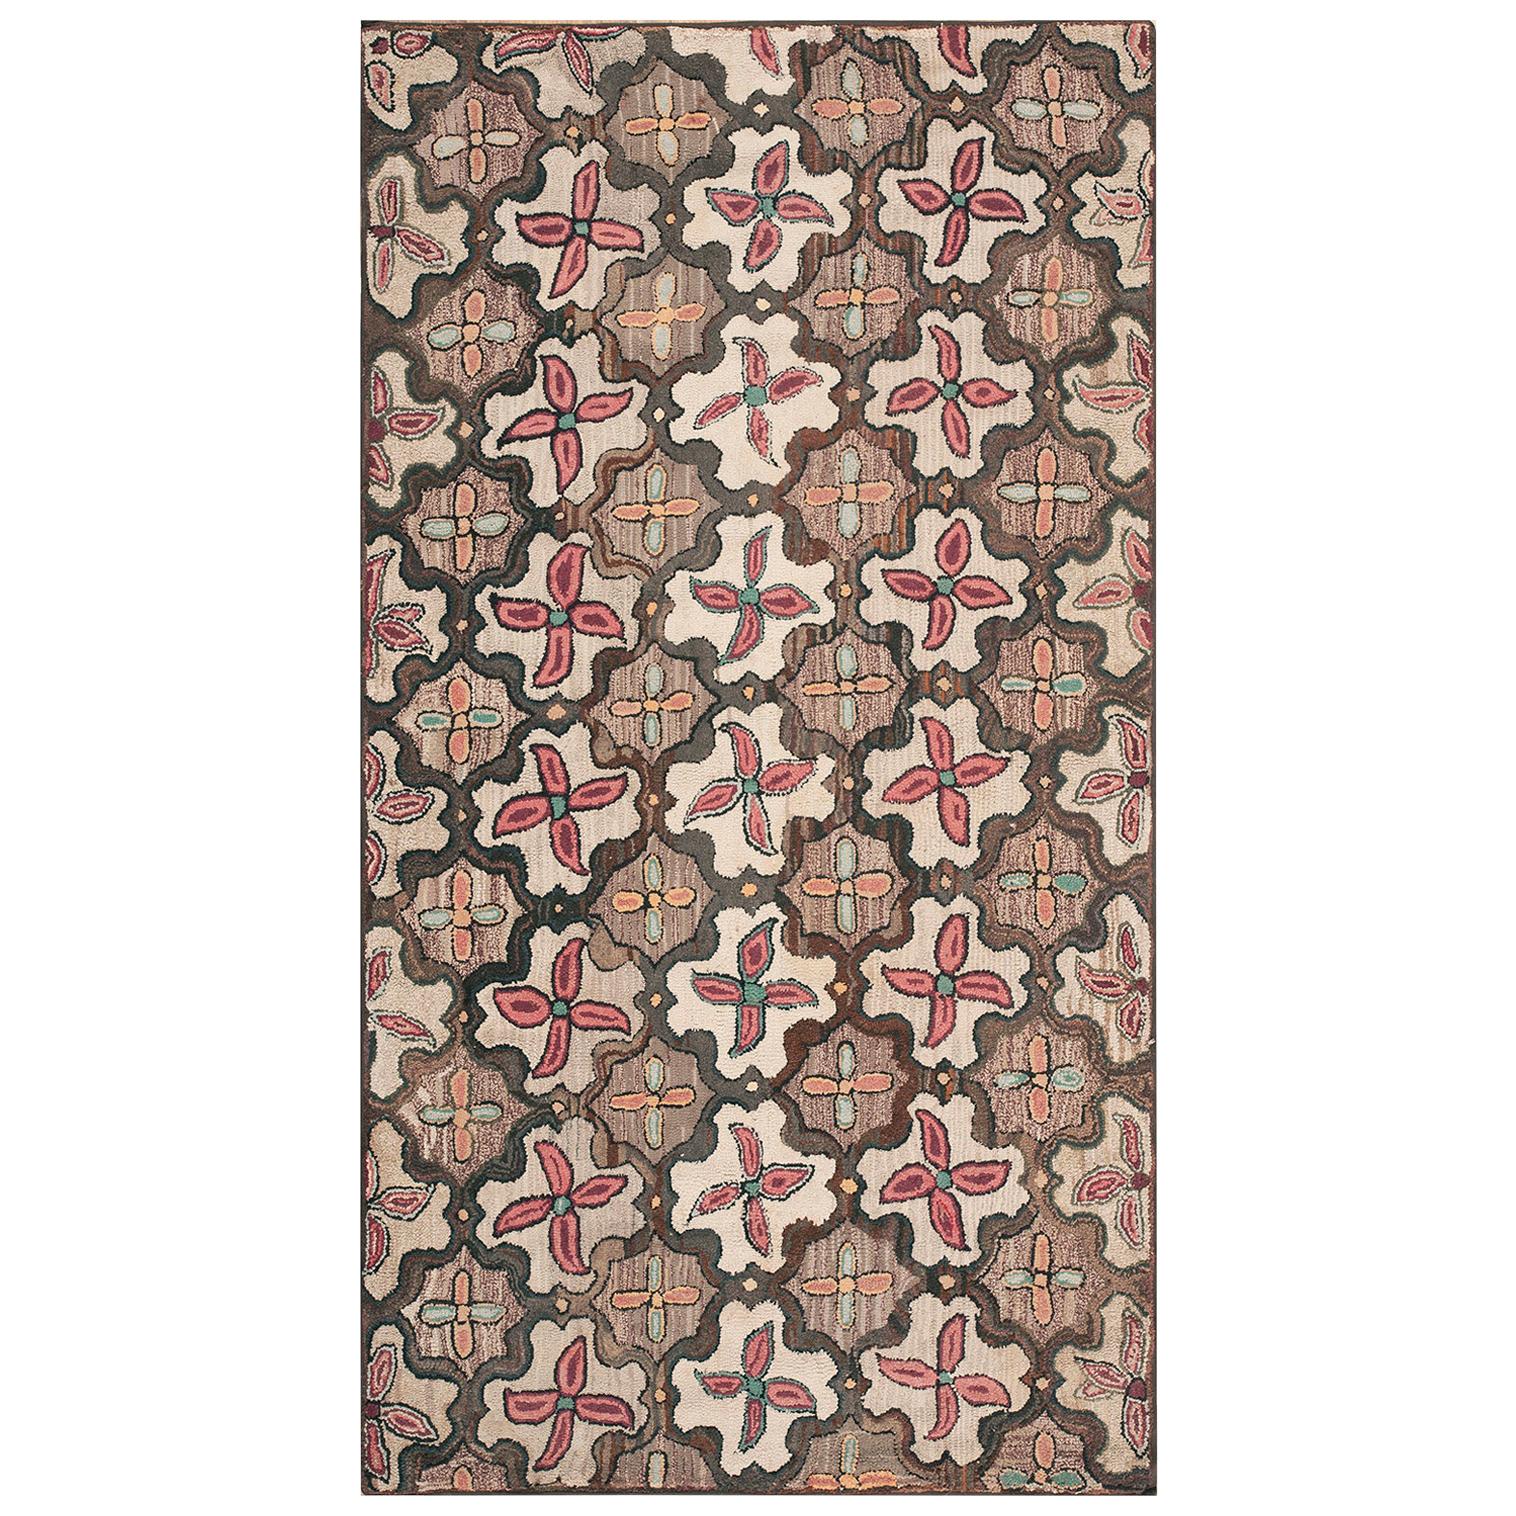 Late 19th Century American Hooked Rug ( 4' 5" x 8' 1" - 135 x 245 cm ) 